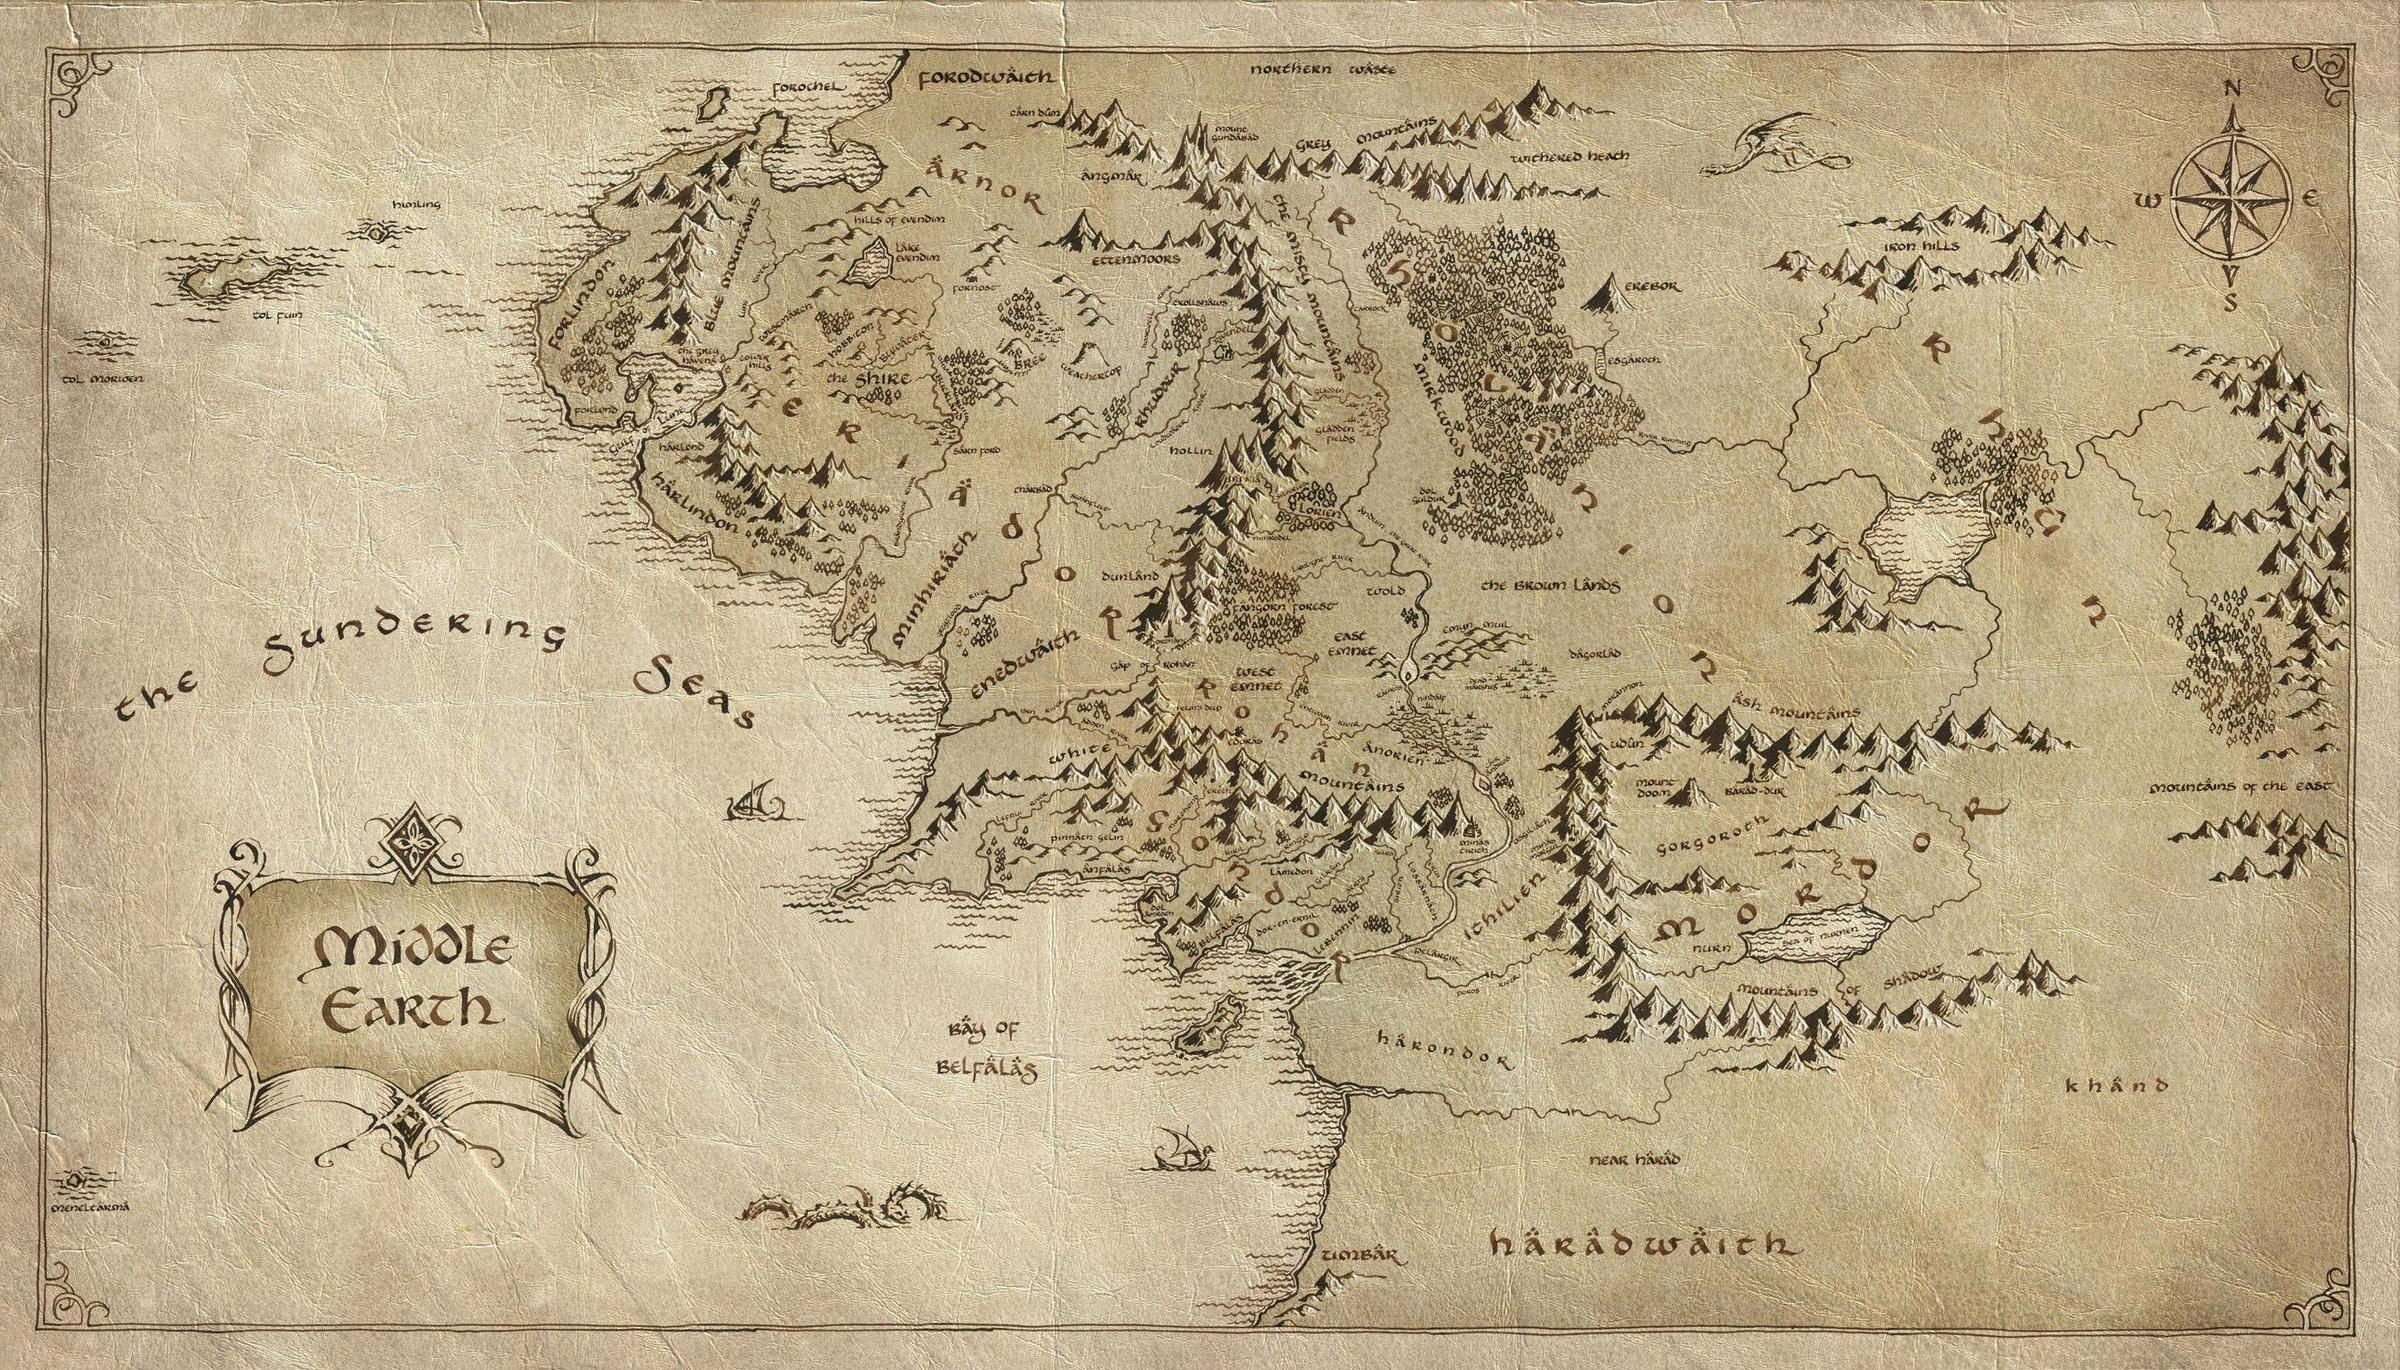 Wallpaper lord of the rings, the lord of the rings, map, middle